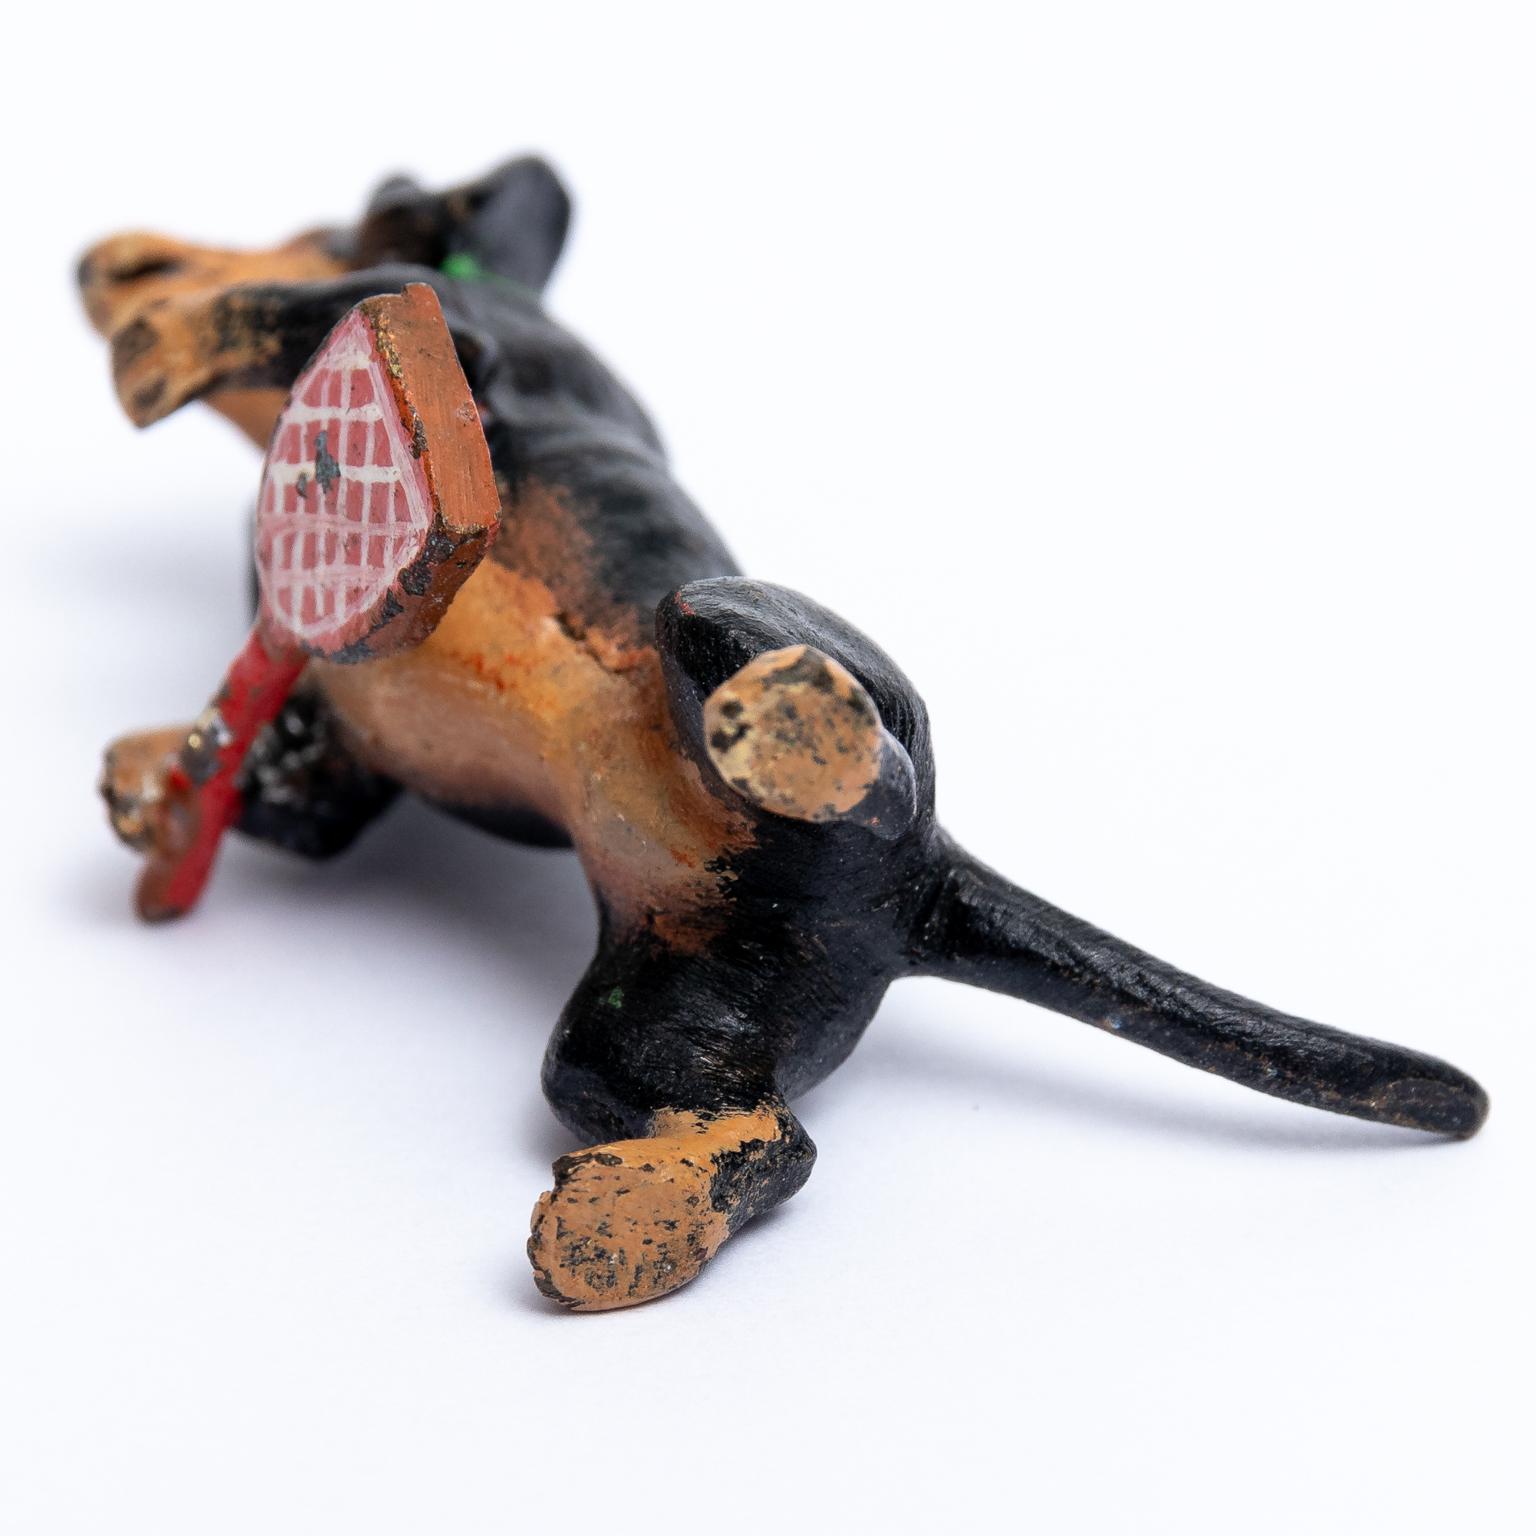 Circa 20th century Austrian cold painted bronze Dachshund dog figurine depicted playing a racket sport. Please note of wear consistent with age and use. The piece is unmarked. Made in Austria.